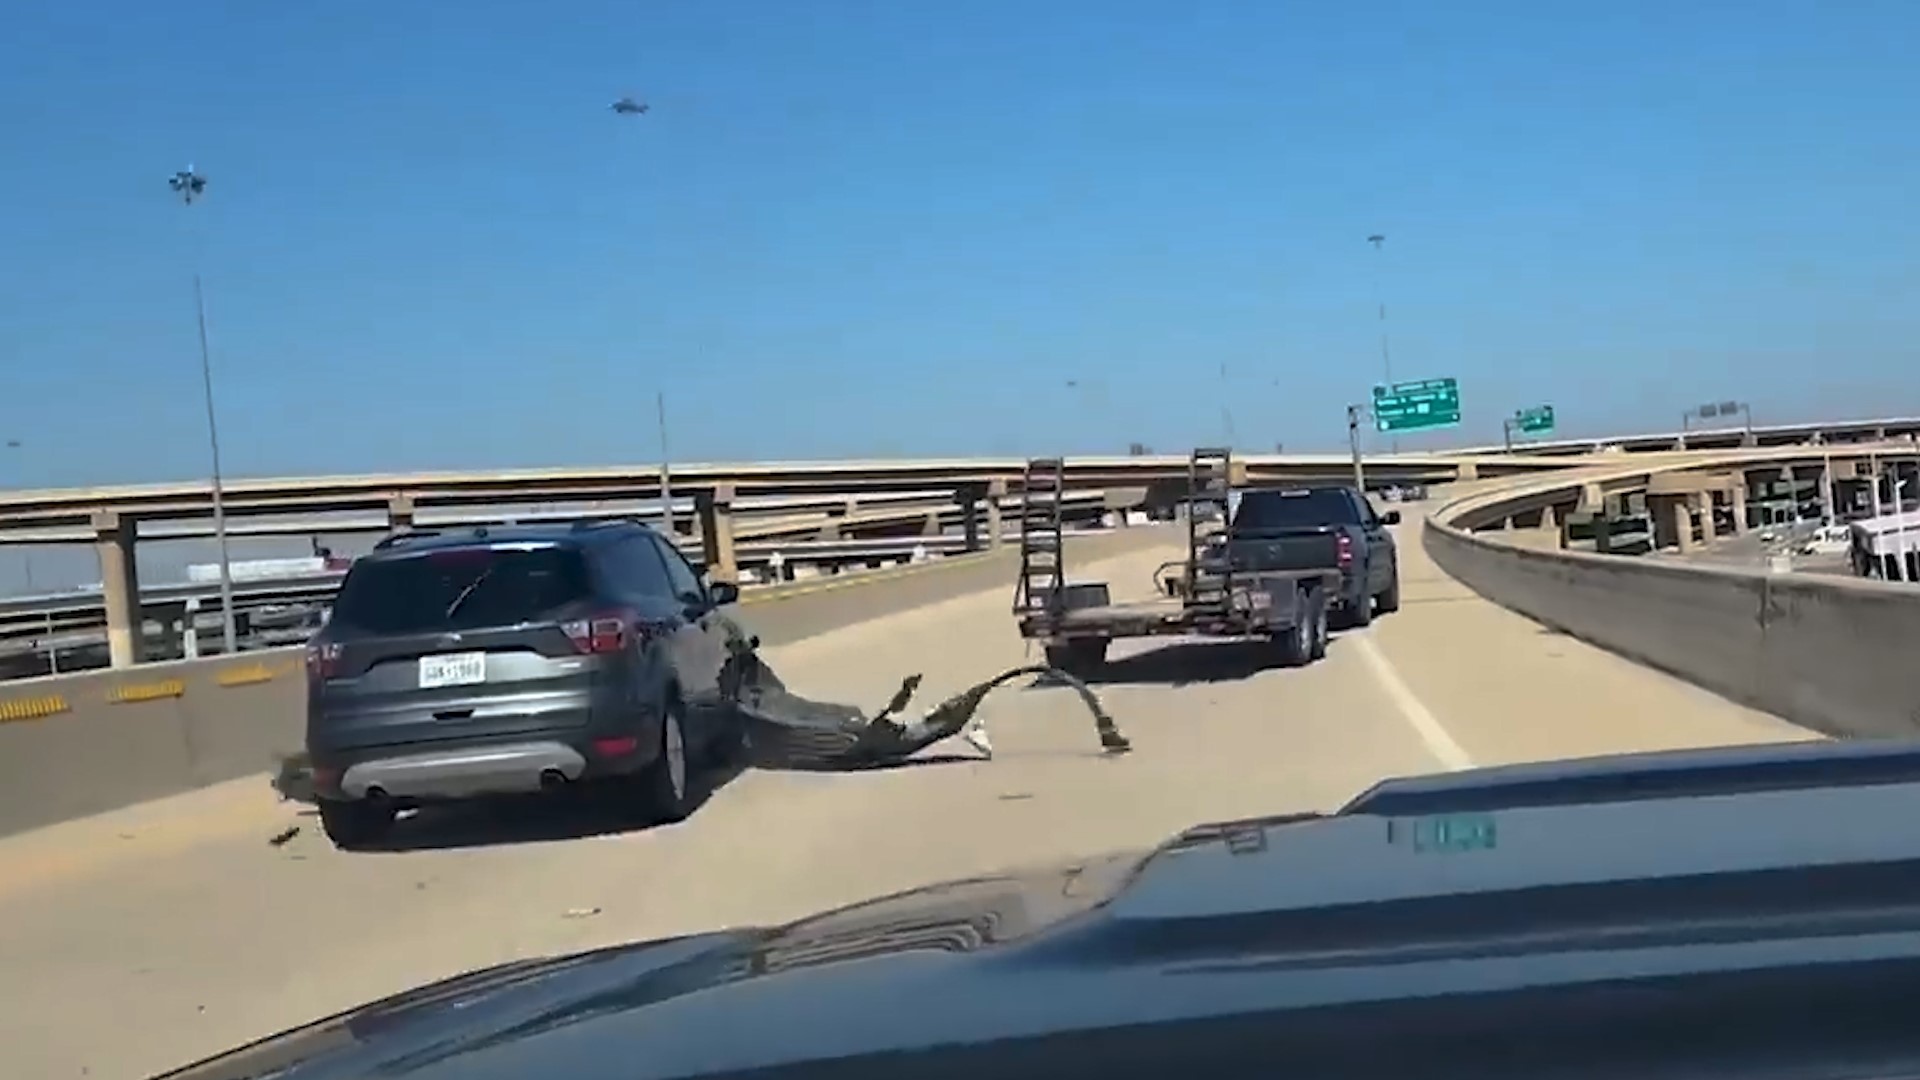 Some viral dashcam video was first posted showing a truck's flatbed trailer rip an SUV's bumper off. The SUV driver then later shared what led up to that incident.